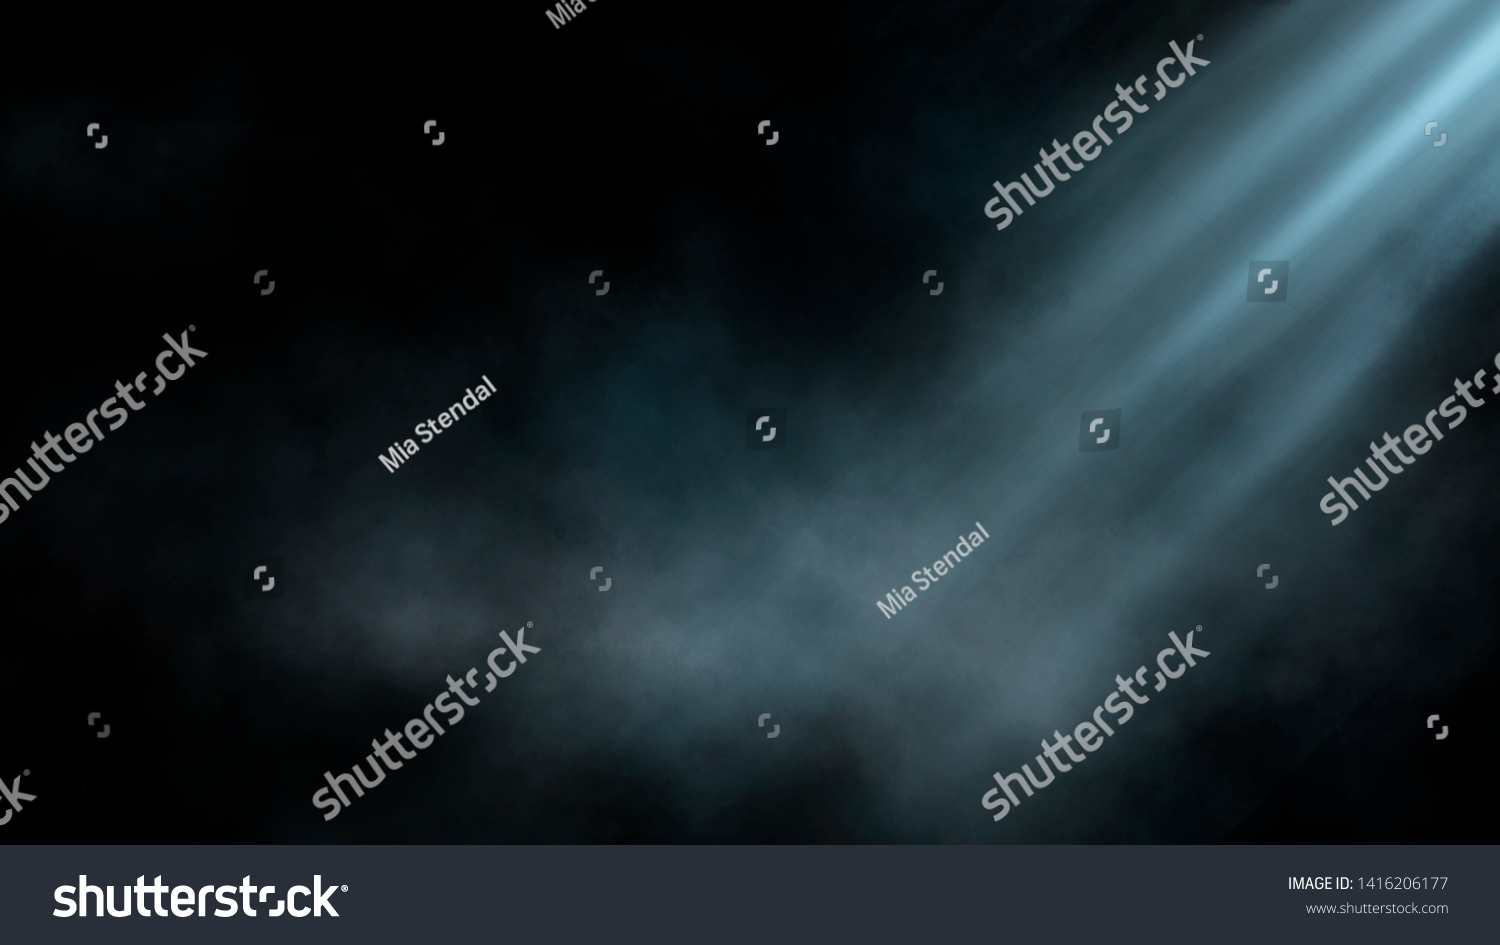 Empty street scene background with abstract spotlights light. Night view of street light reflected on water. Rays through the fog. Smoke, fog, wet asphalt with reflection of lights.  #1416206177